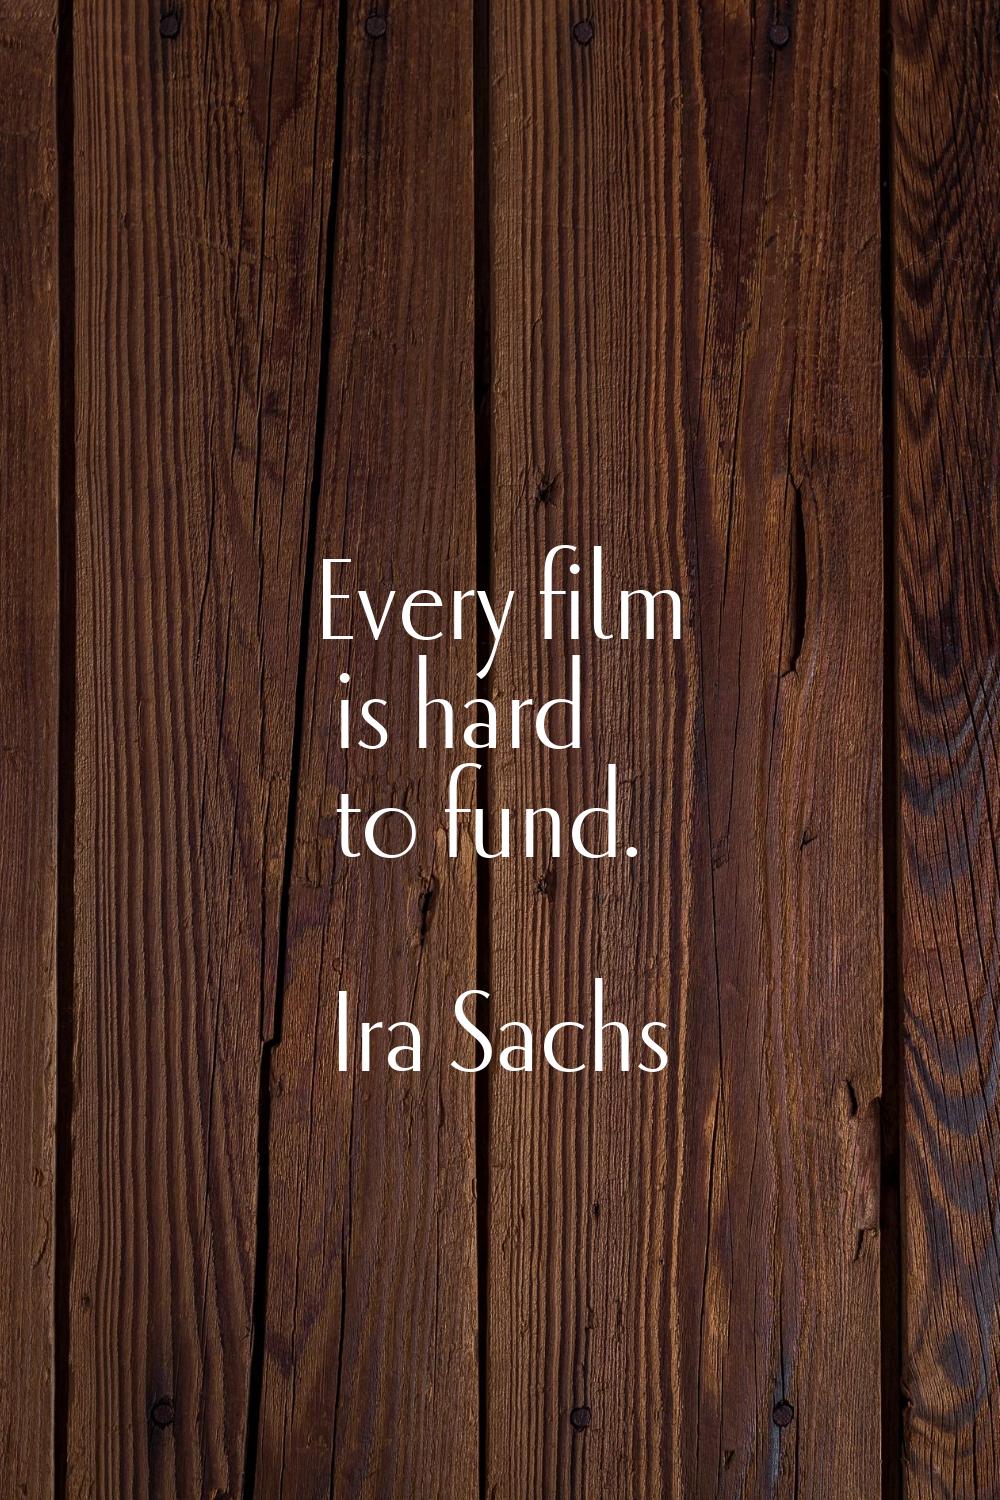 Every film is hard to fund.